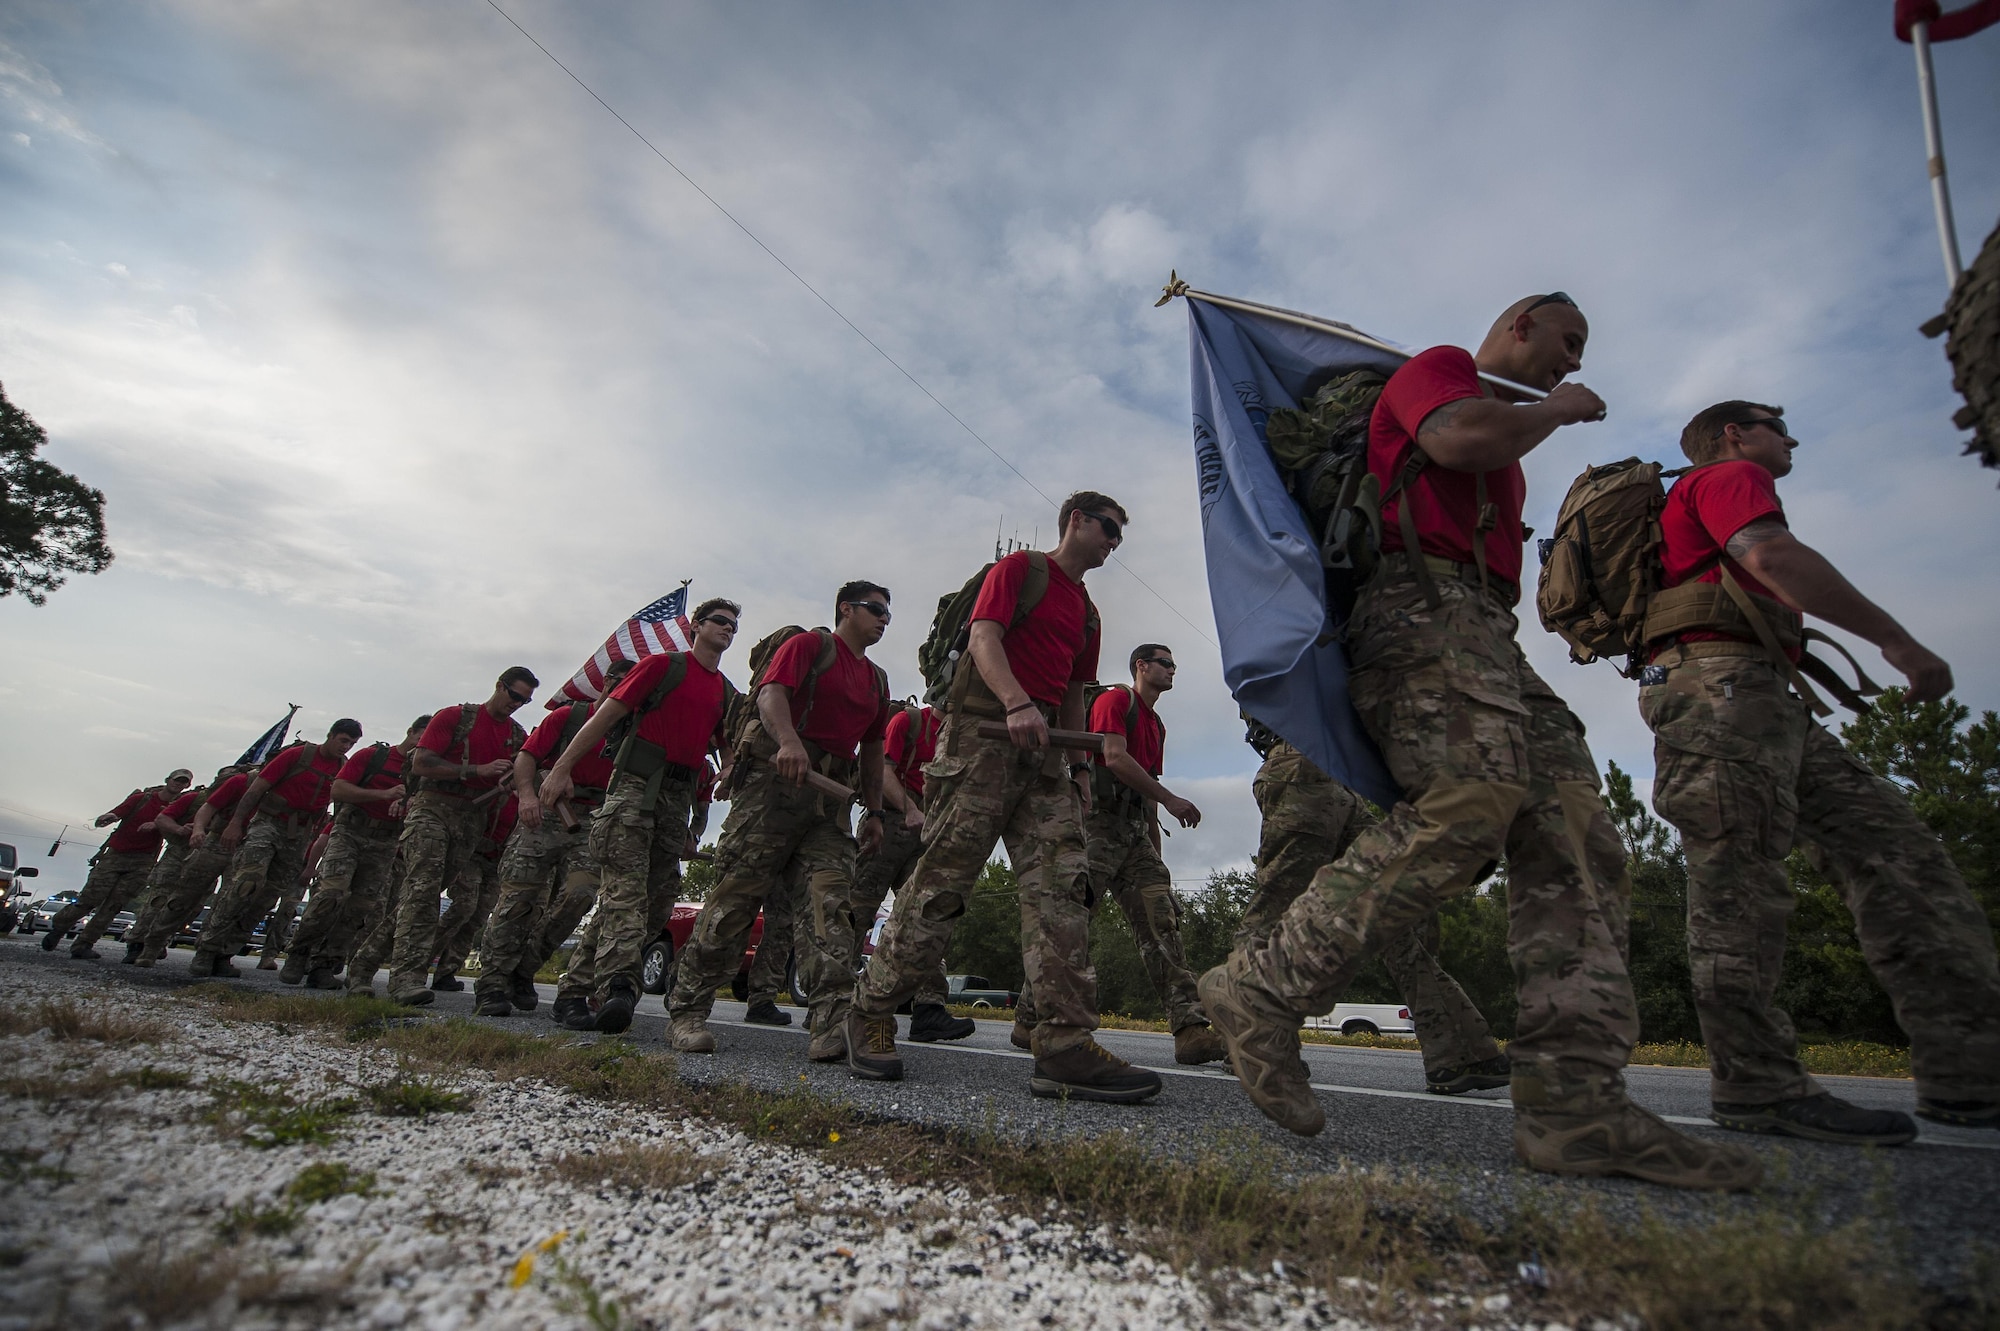 Special Tactics Airmen carry 20 batons during a memorial march to Hurlburt Field, Fla., Oct. 13, 2015. The team of 20 Special Tactics Airmen started at 2 a.m. on Oct. 4, from Joint Base San Antonio-Lackland, Texas, and marched 812 miles through five states to meet with the gold star families and end the memorial march with a ceremony on Hurlburt Field. Each two-man team walked approximately 90 miles during the 10-day trek while carrying a 50-pound ruck sack and a commemorative baton engraved with a fallen Special Tactics Airman's name. The memorial march is only held when a Special Tactics operator is killed in action that year, but honors all 19 Special Tactics pararescuemen and combat controllers who have been killed in action since 2001. (U.S. Air Force photo by Airman Kai White/Released)